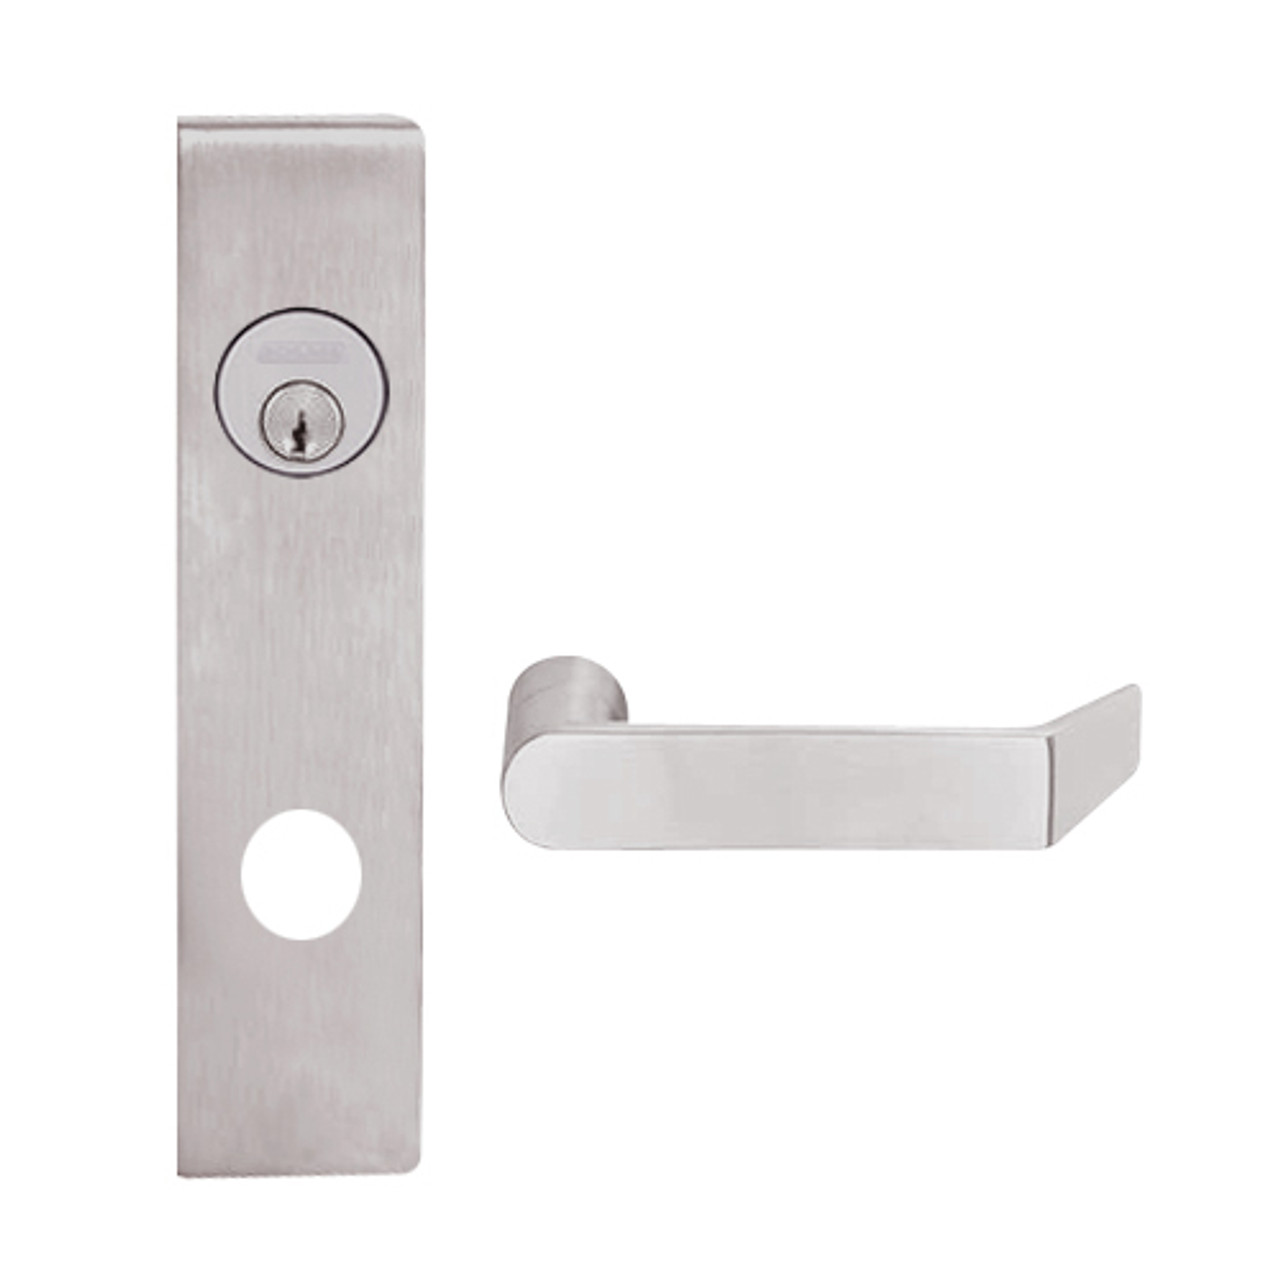 L9050P-06L-630 Schlage L Series Entrance Commercial Mortise Lock with 06 Cast Lever Design in Satin Stainless Steel